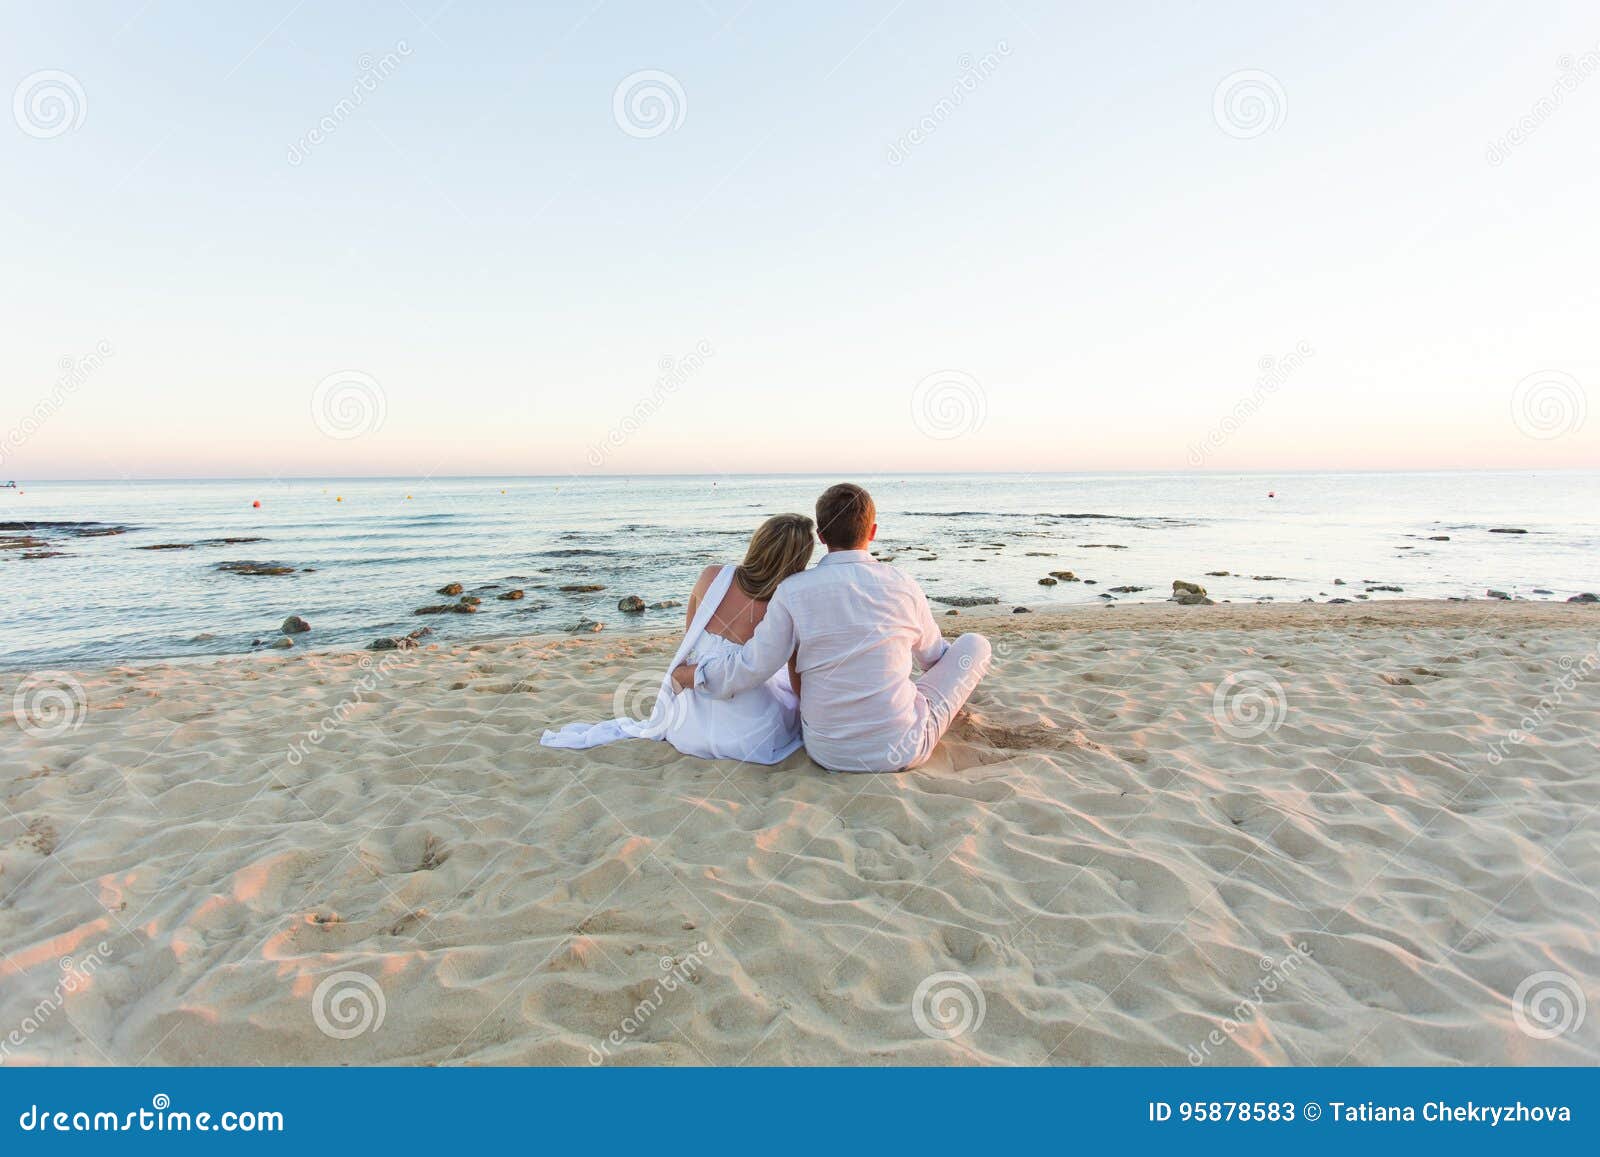 Young Love Couple Sitting Together on Beach, Rear View Stock Image